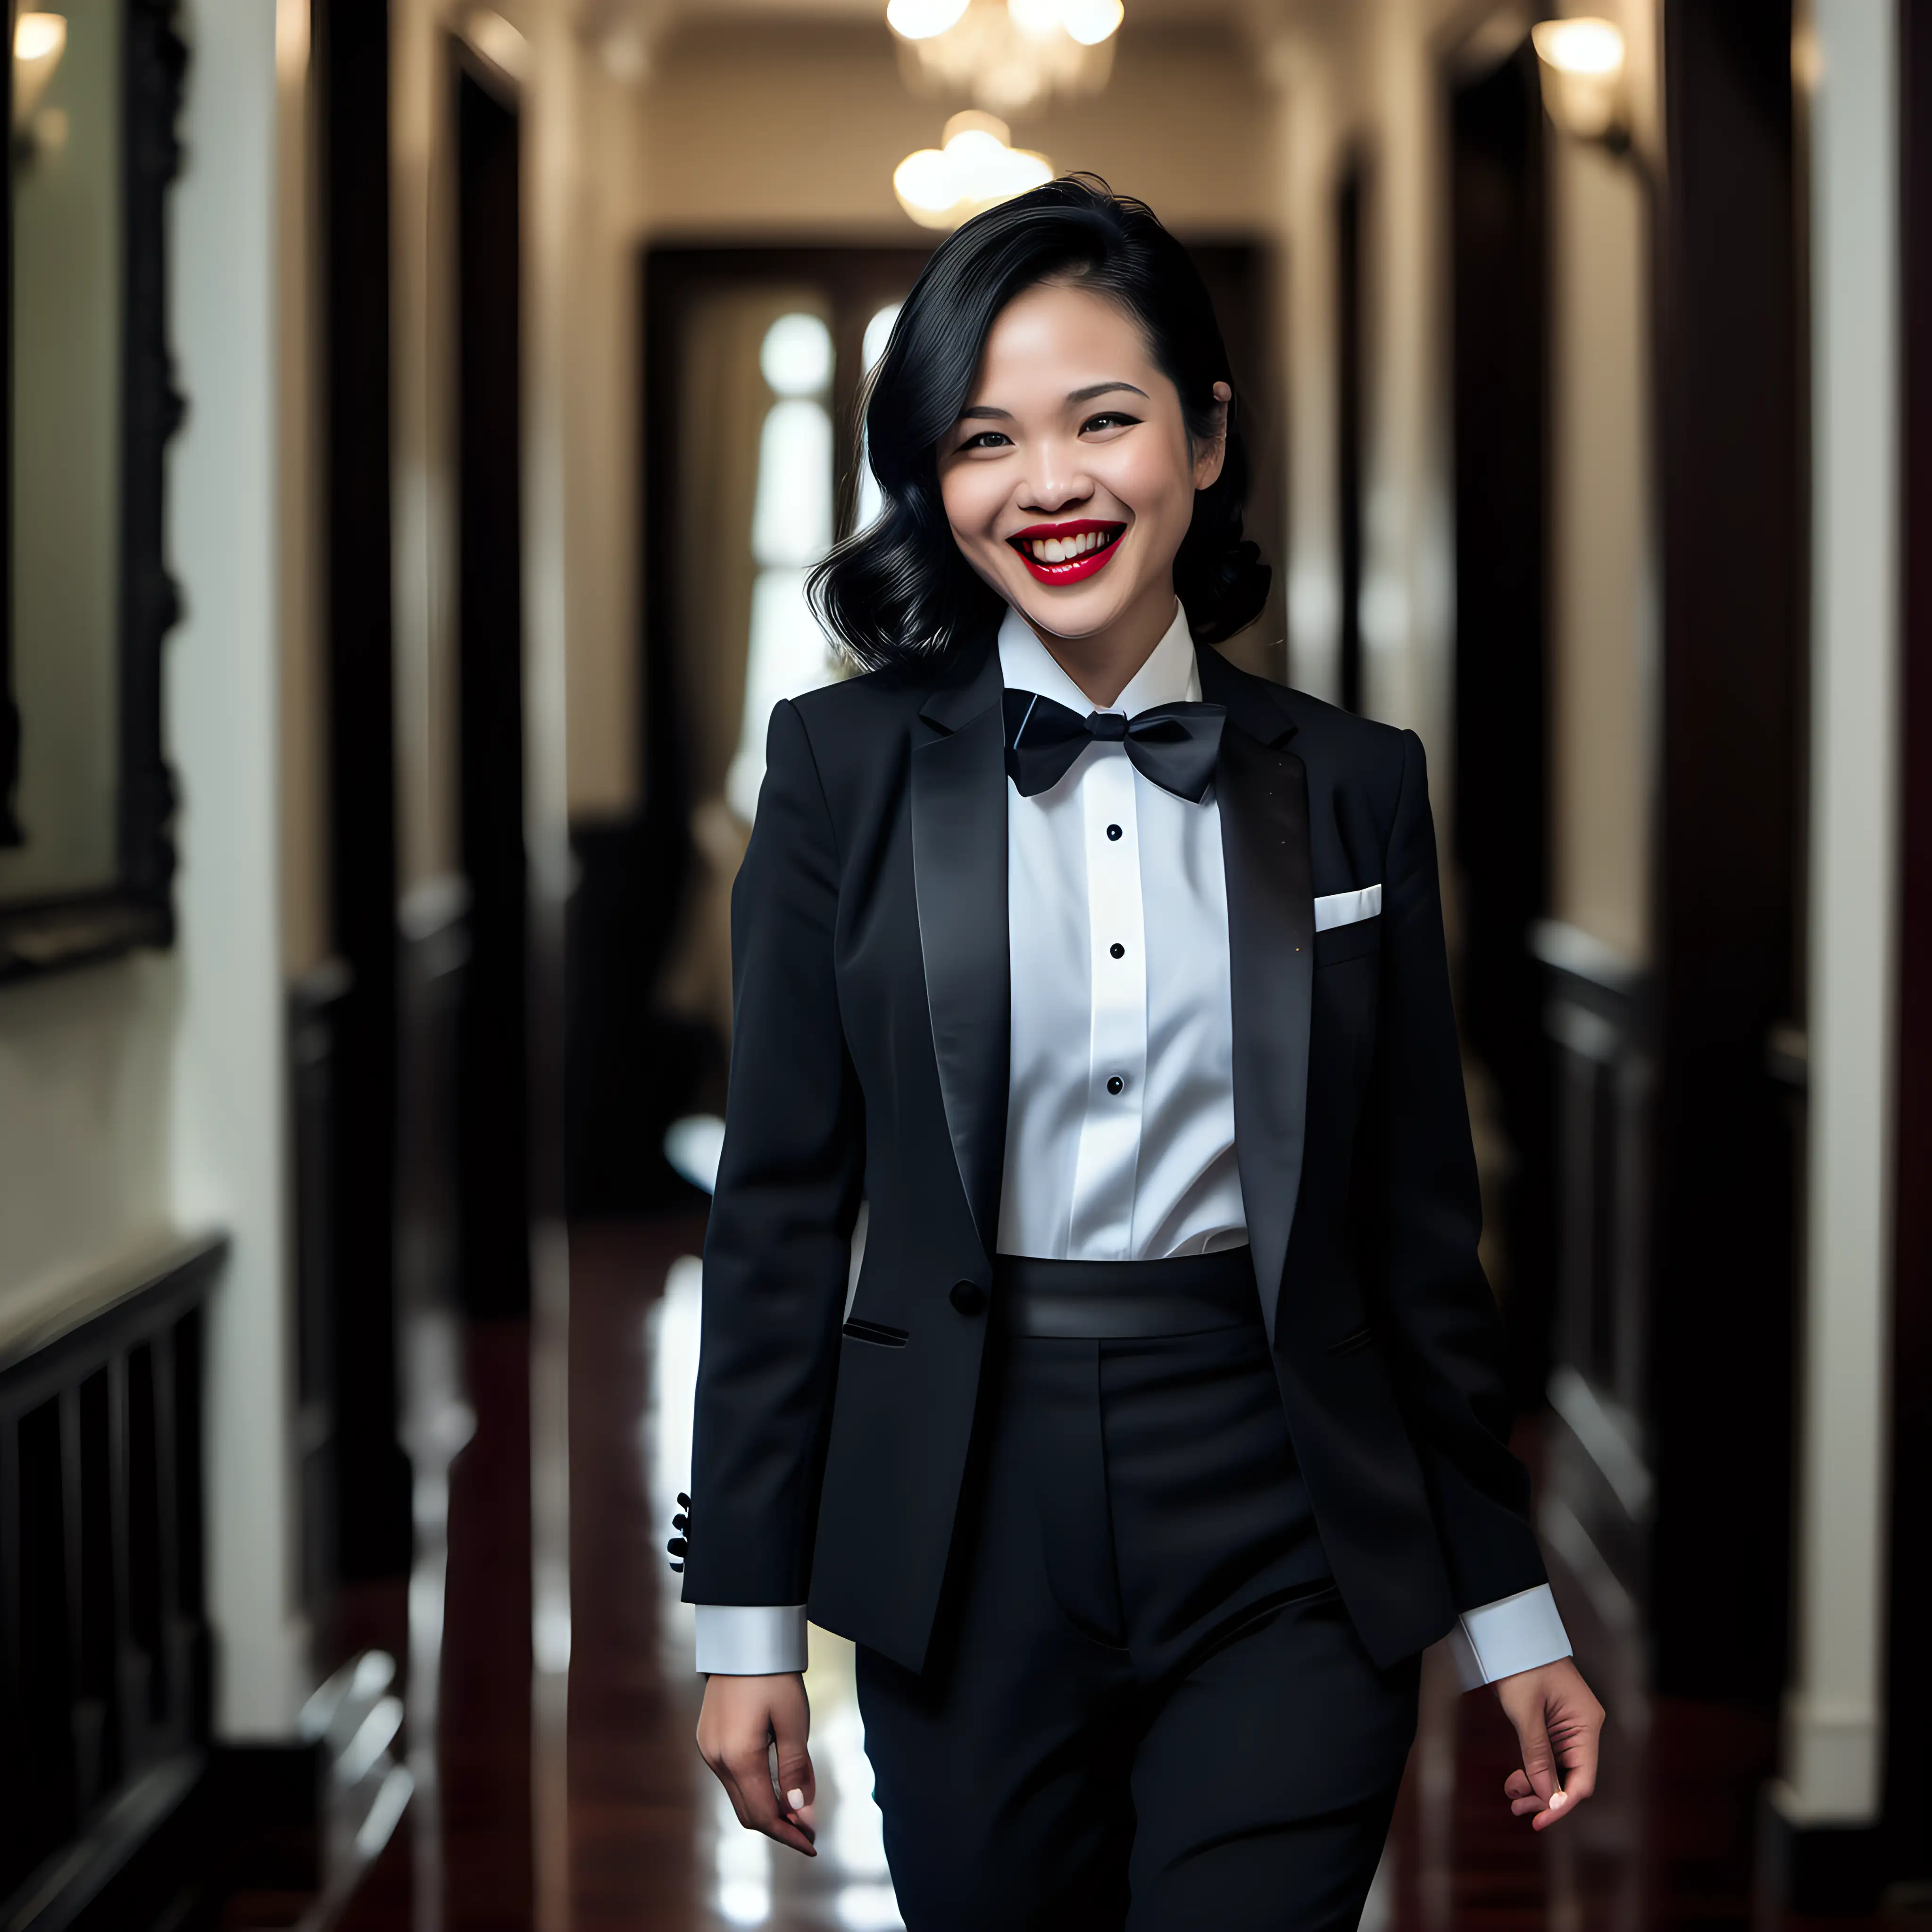 A petite 35 year old gorgeous and smiling and laughing Vietnamese woman with black shoulder length hair and red lipstick wearing a formal tuxedo with a black bow tie and black cufflinks. Her shirt has French double cuffs. Her jacket is open and has a corsage. She is walking down a dark hallway in a mansion.